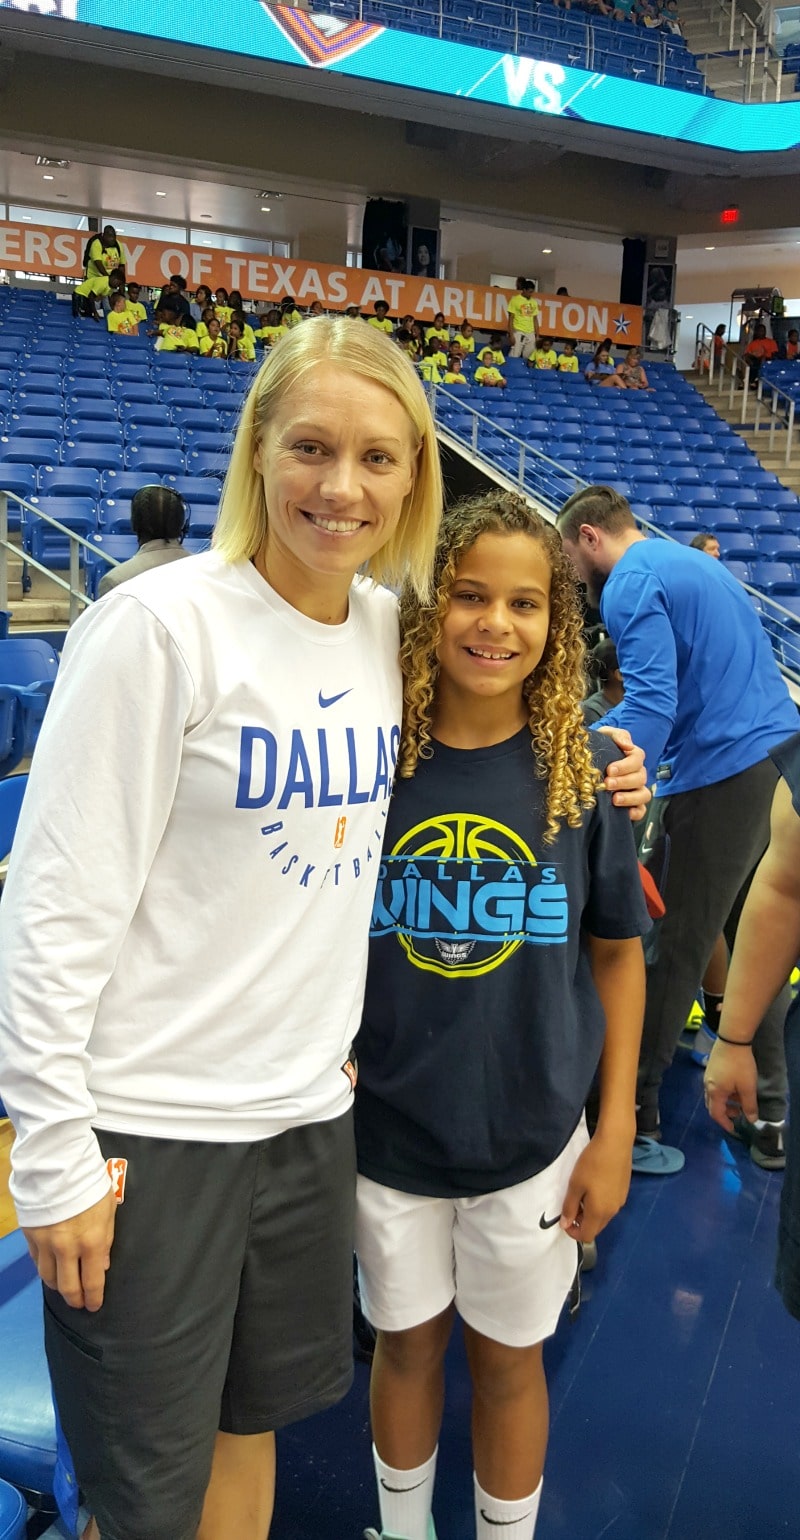 The WNBA Dallas Wings. An Inspiring Show Of Strength, Teamwork, and Athleticism